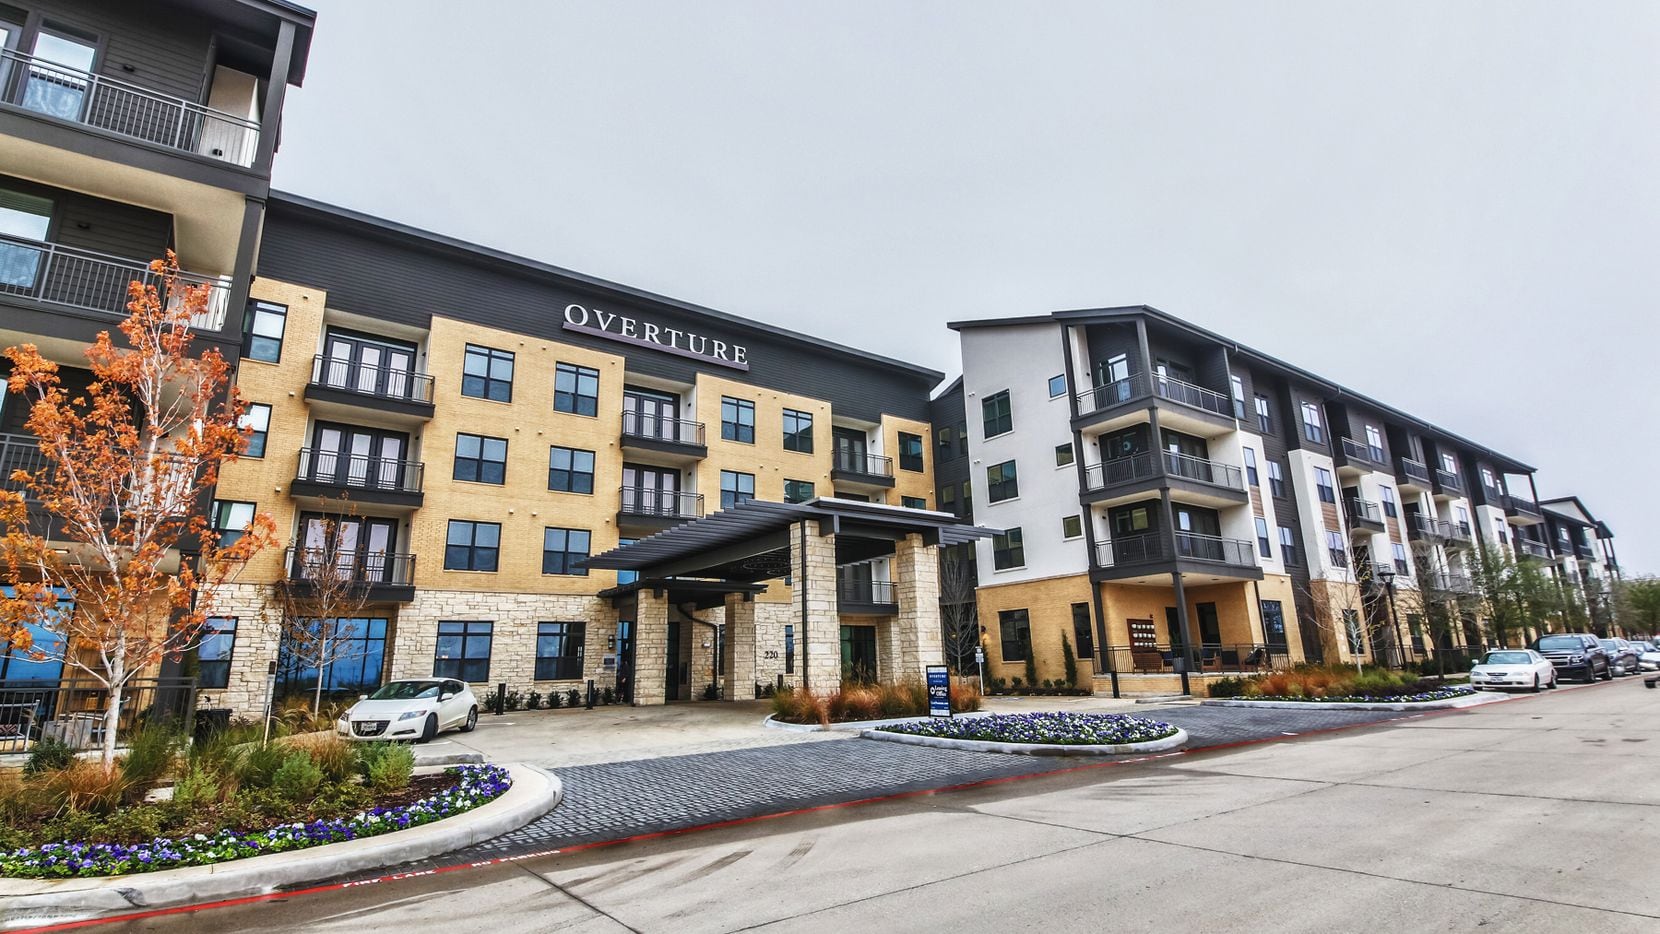 A four-story apartment complex called Overture Fairview with a yellow and gray exterior.